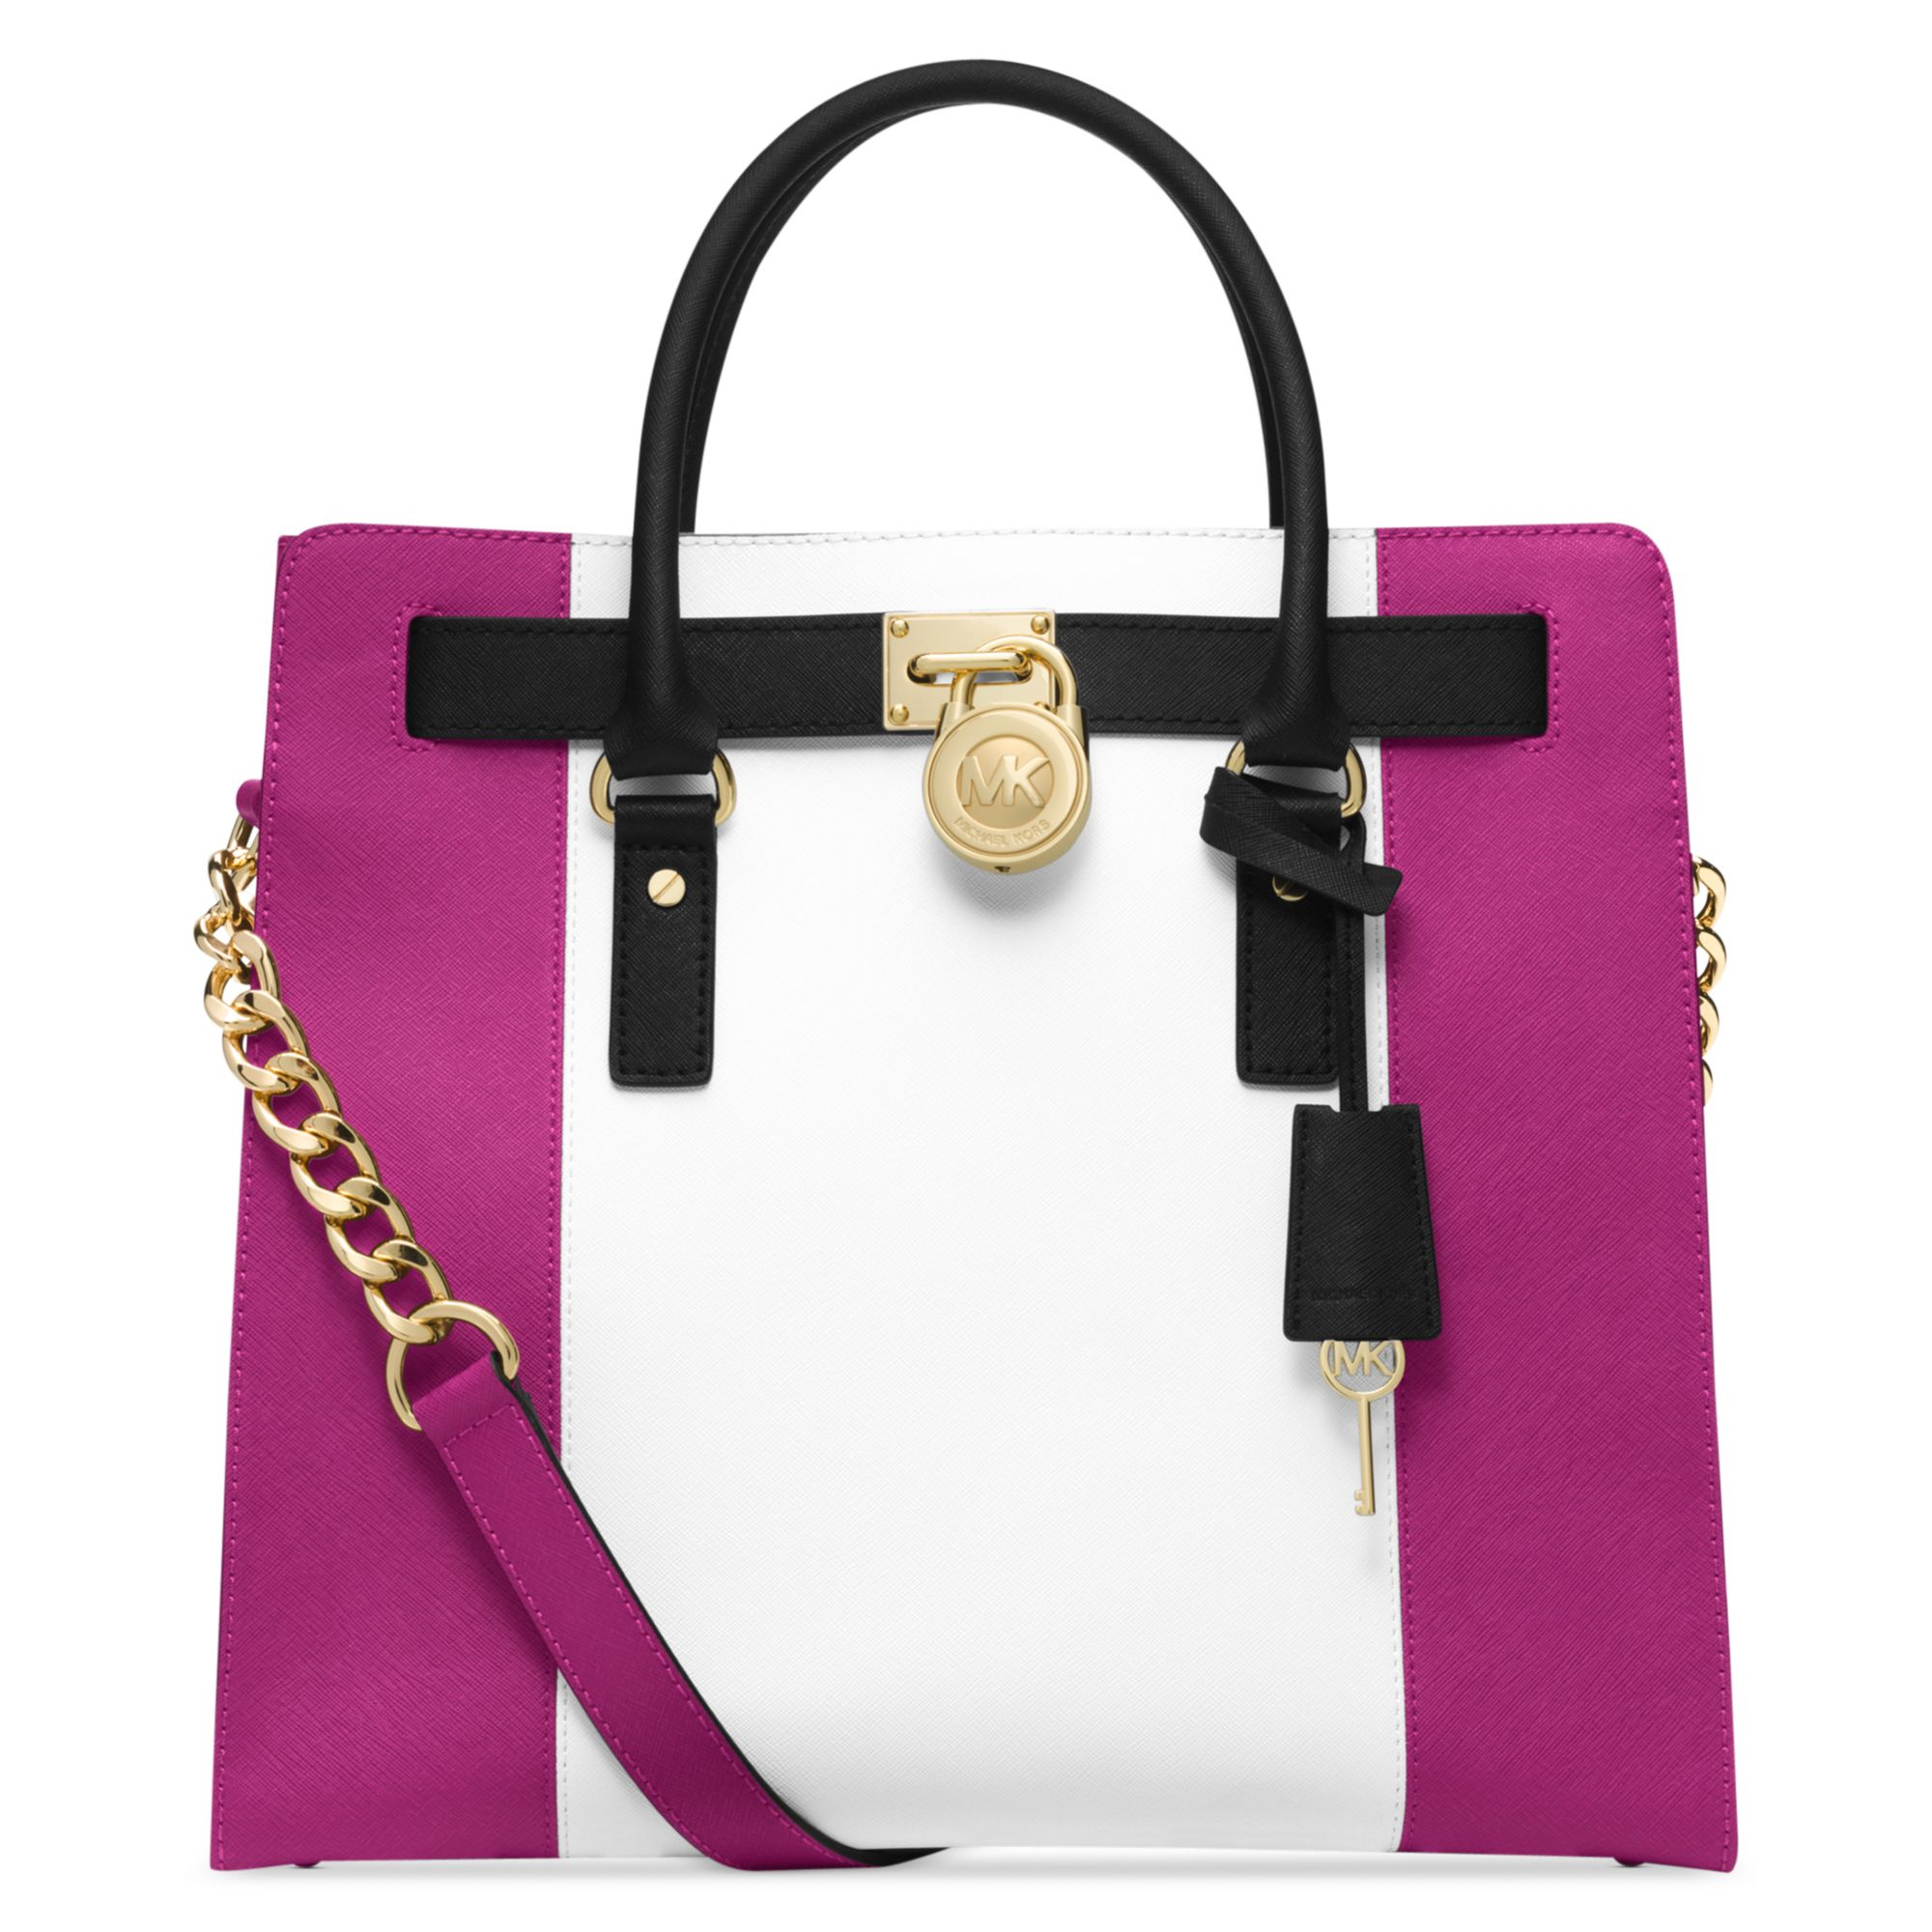 Michael Kors Pink And Black Purse Hot Sale, SAVE 43% 